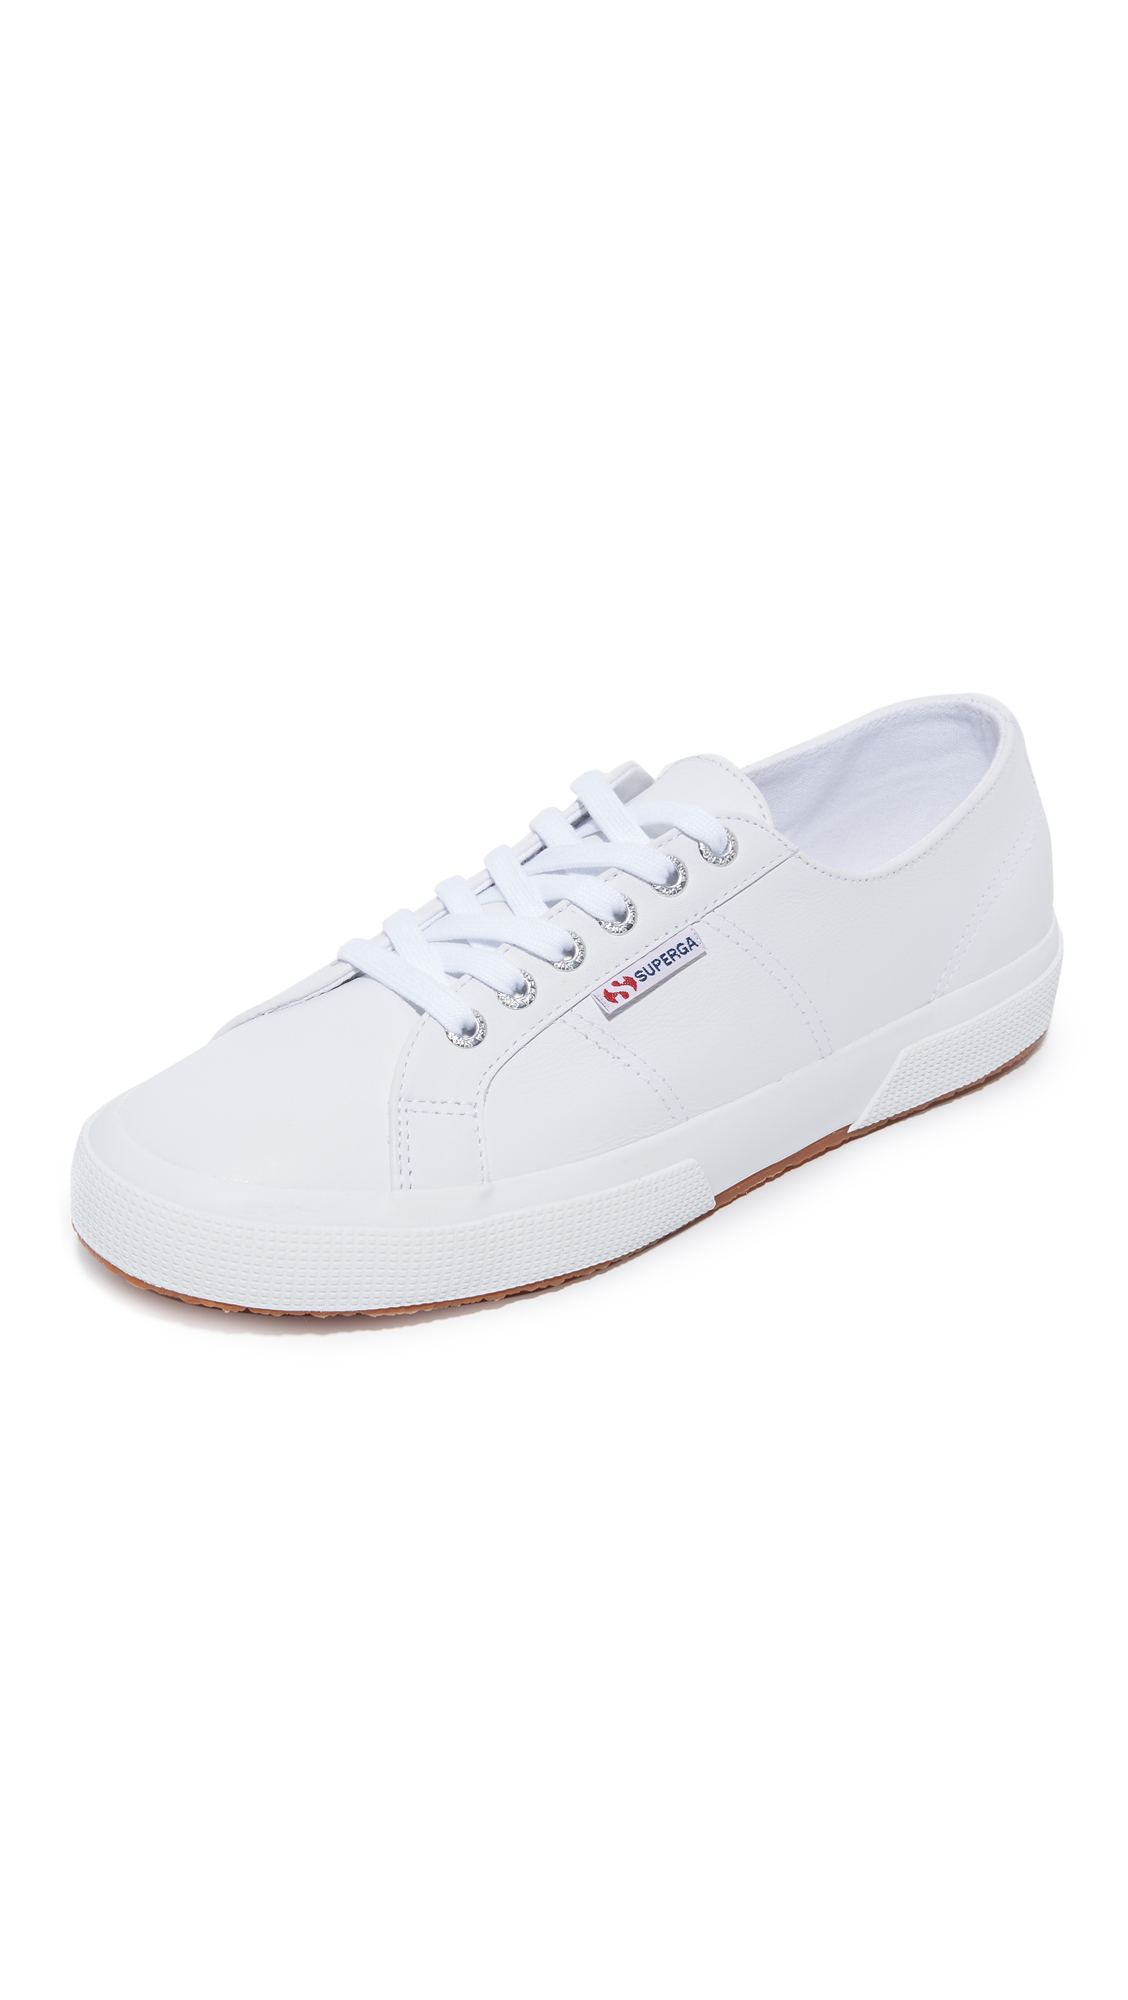 Superga 2750 Leather Cotu Classic Sneakers In White | ModeSens